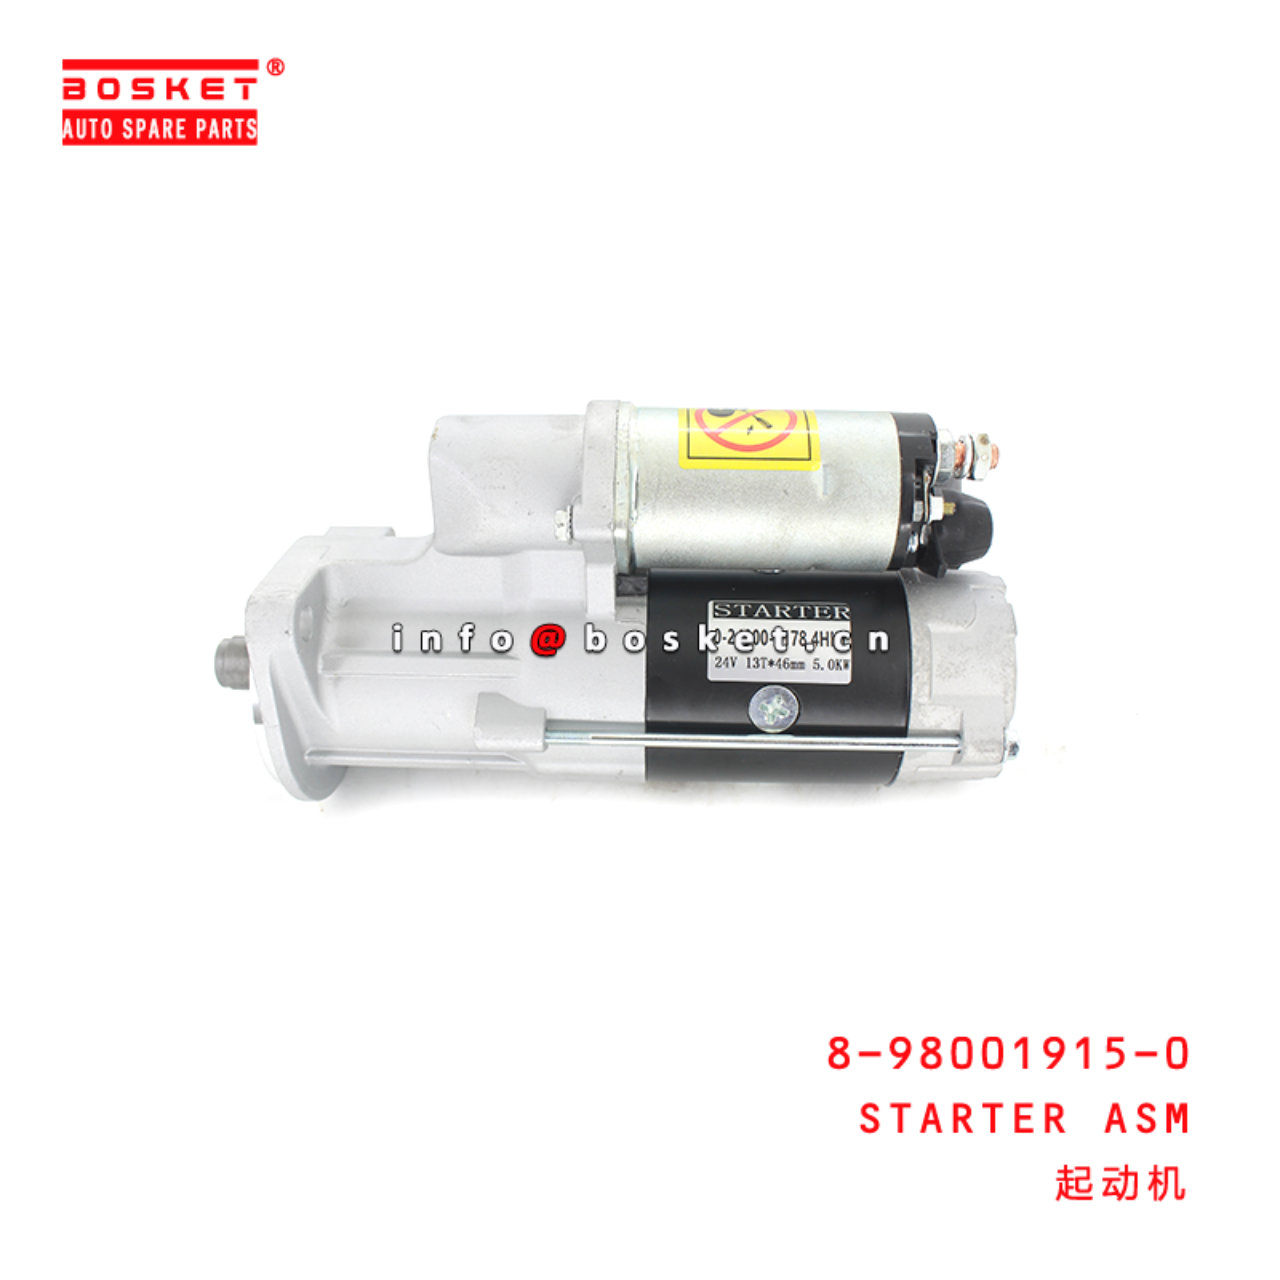 8-98001915-0 Starter Assembly Suitable for ISUZU XD 8-98001915-0 8980019150